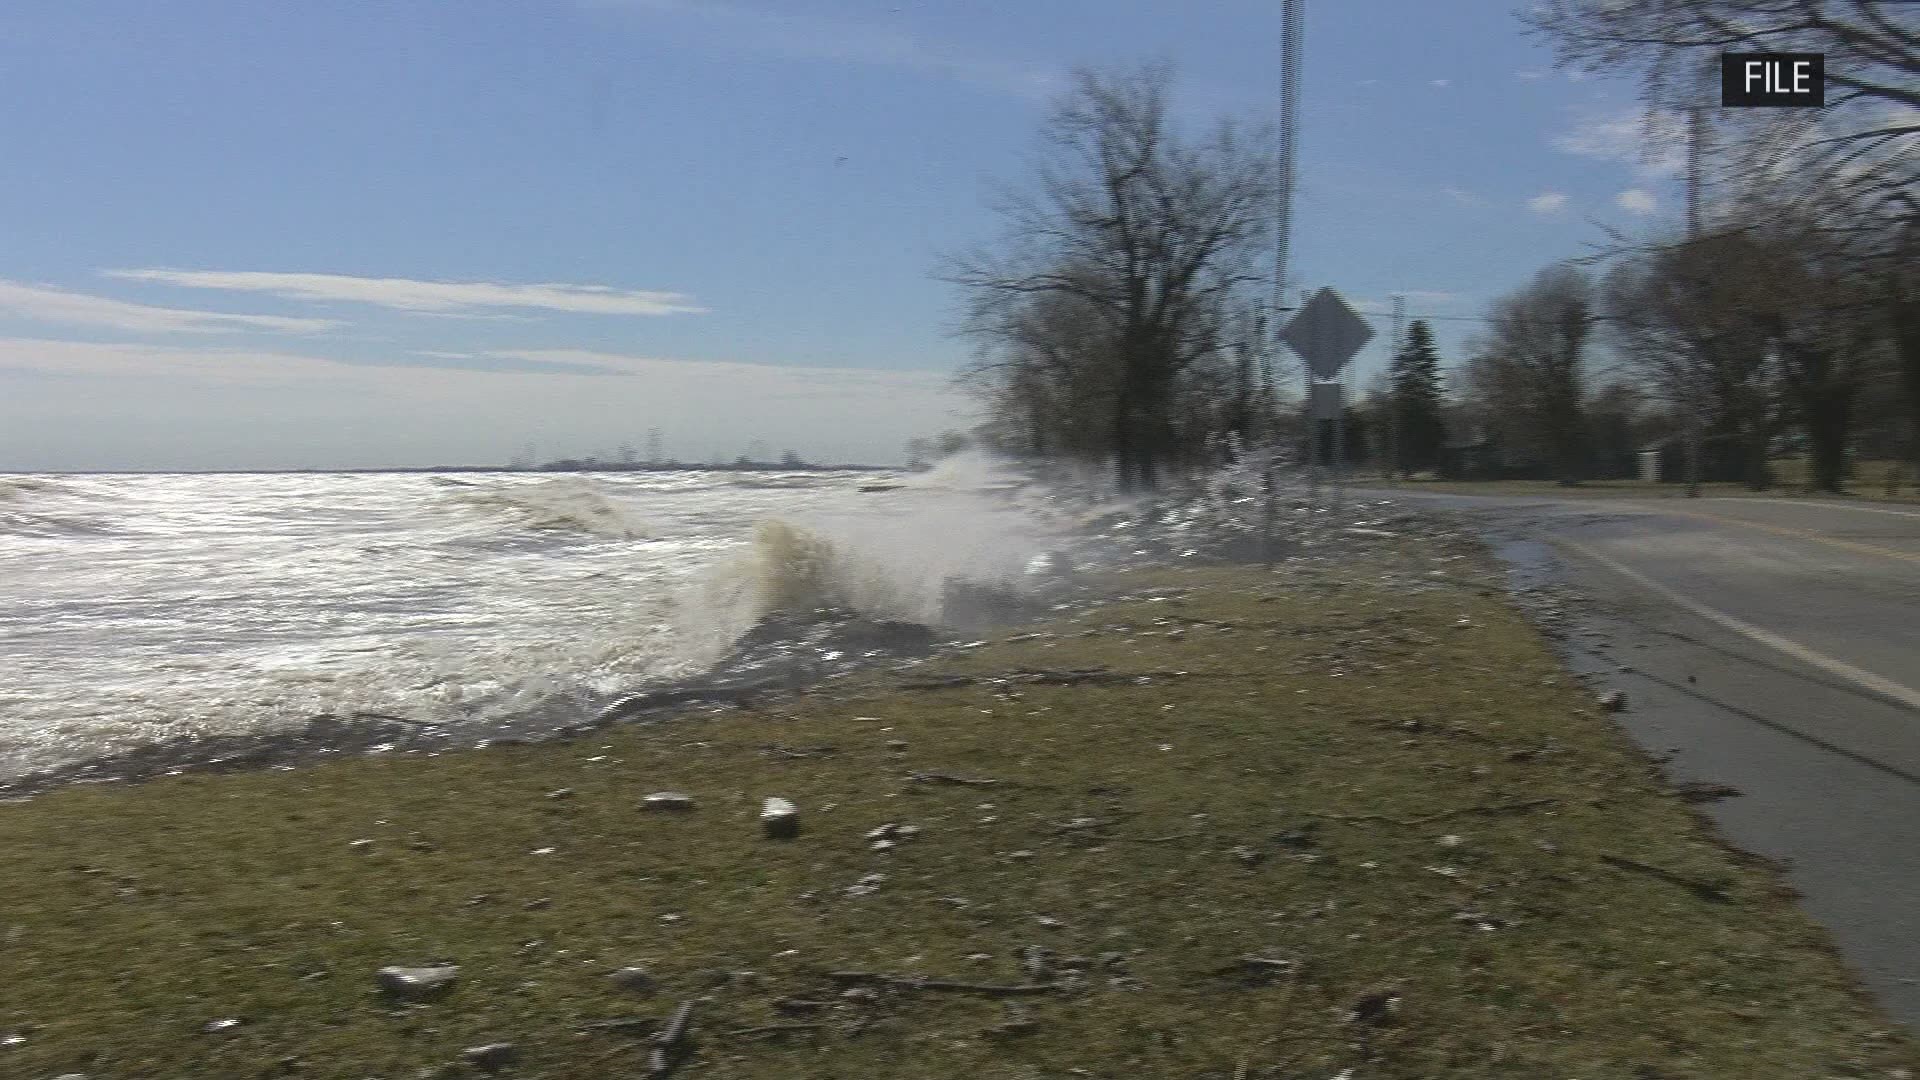 It's been an unusual winter on Lake Erie, with little to no ice so far and some of the highest water levels on record. It could prove to be a destructive combination